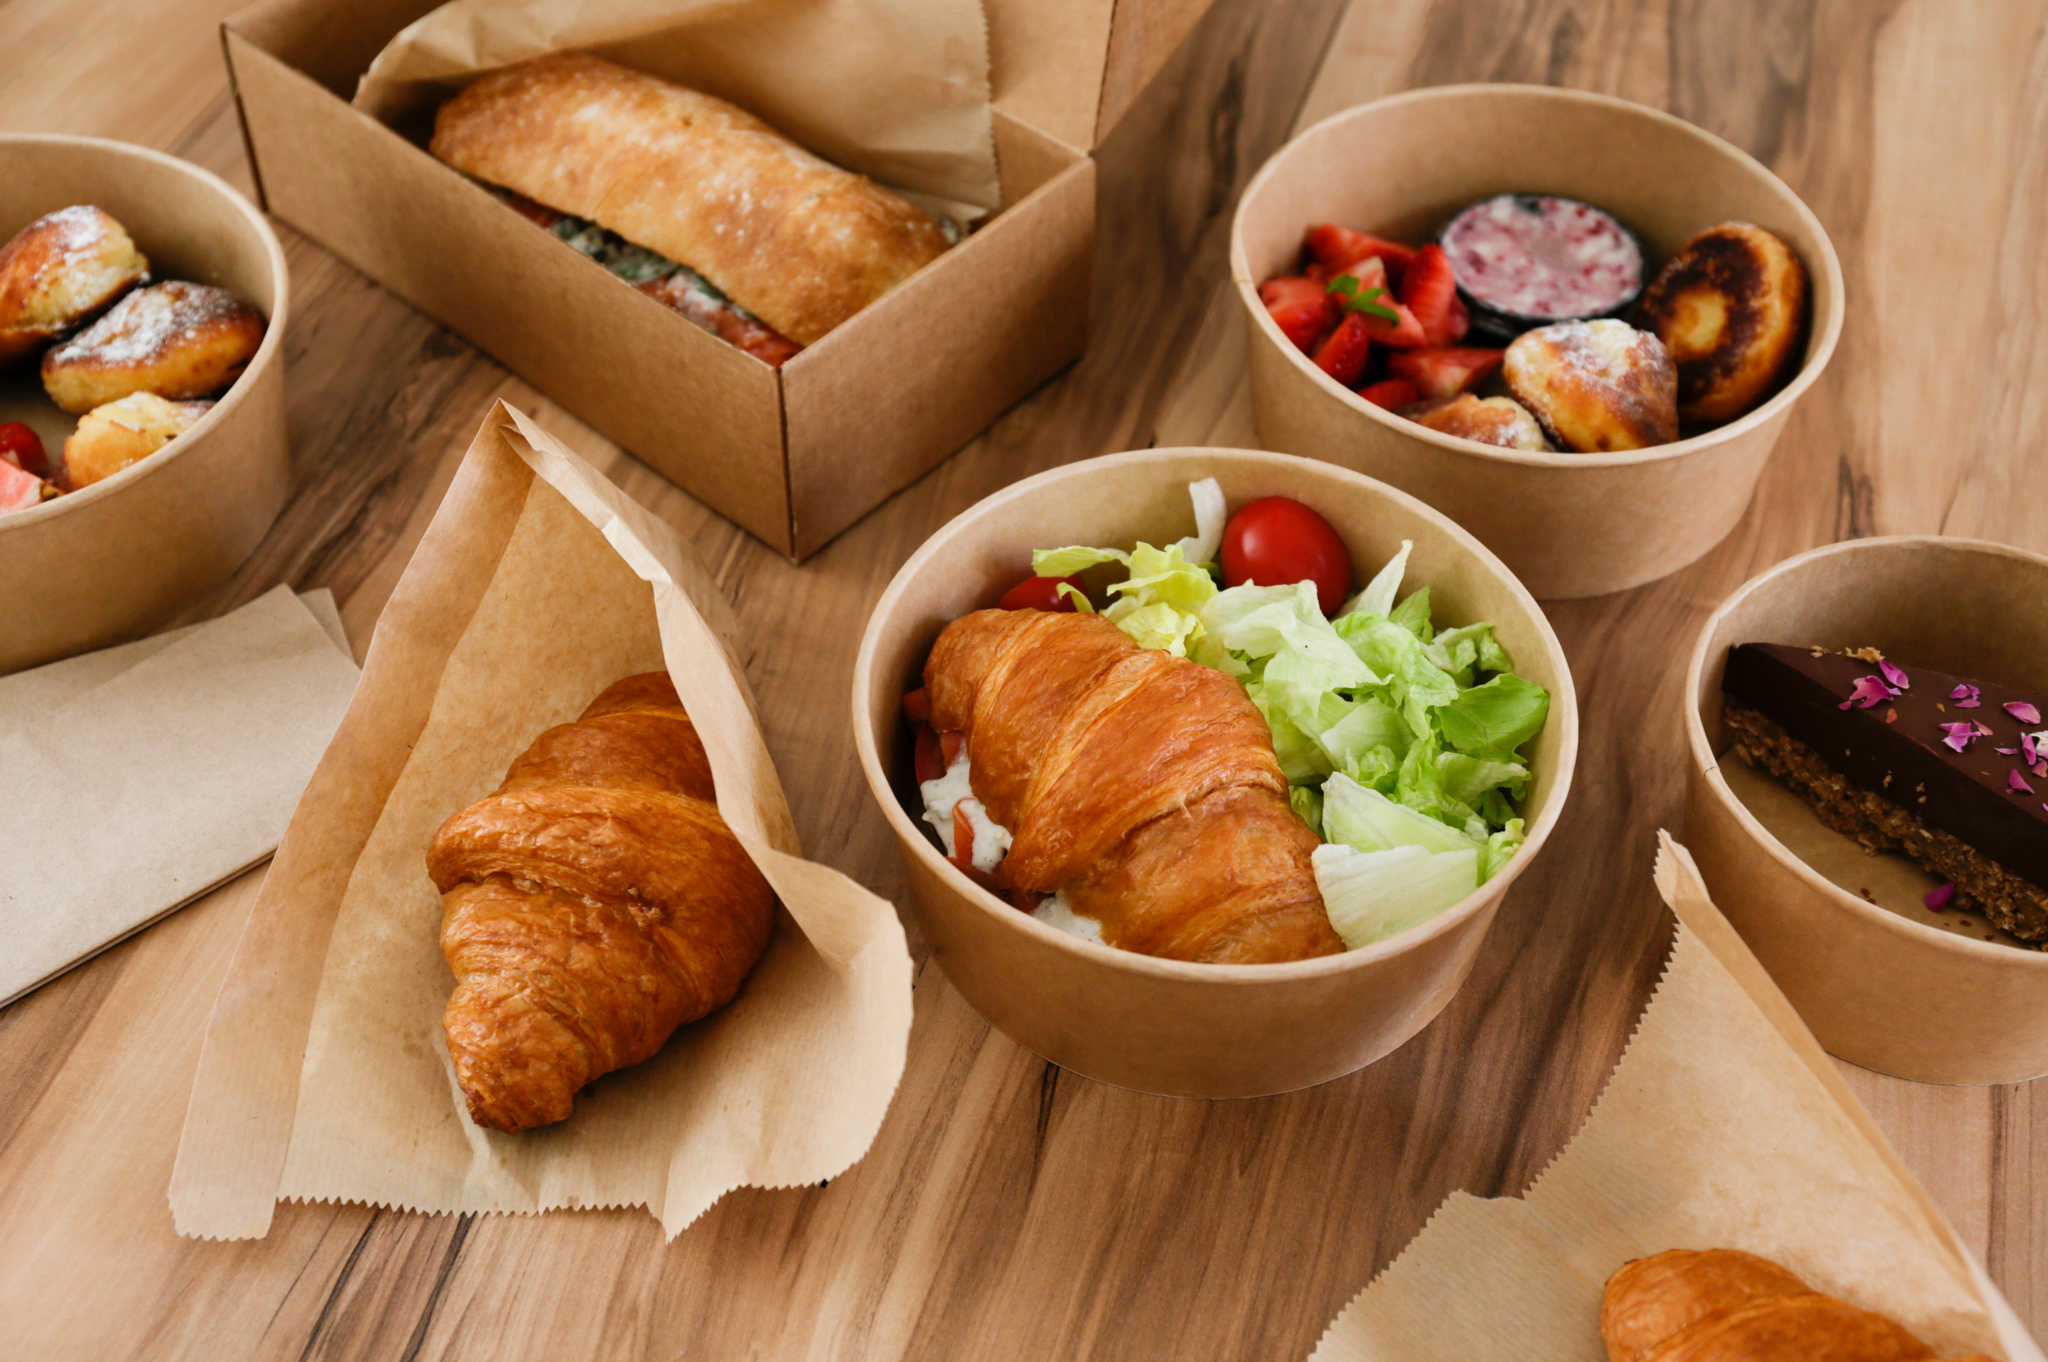 Food in Paper Containers